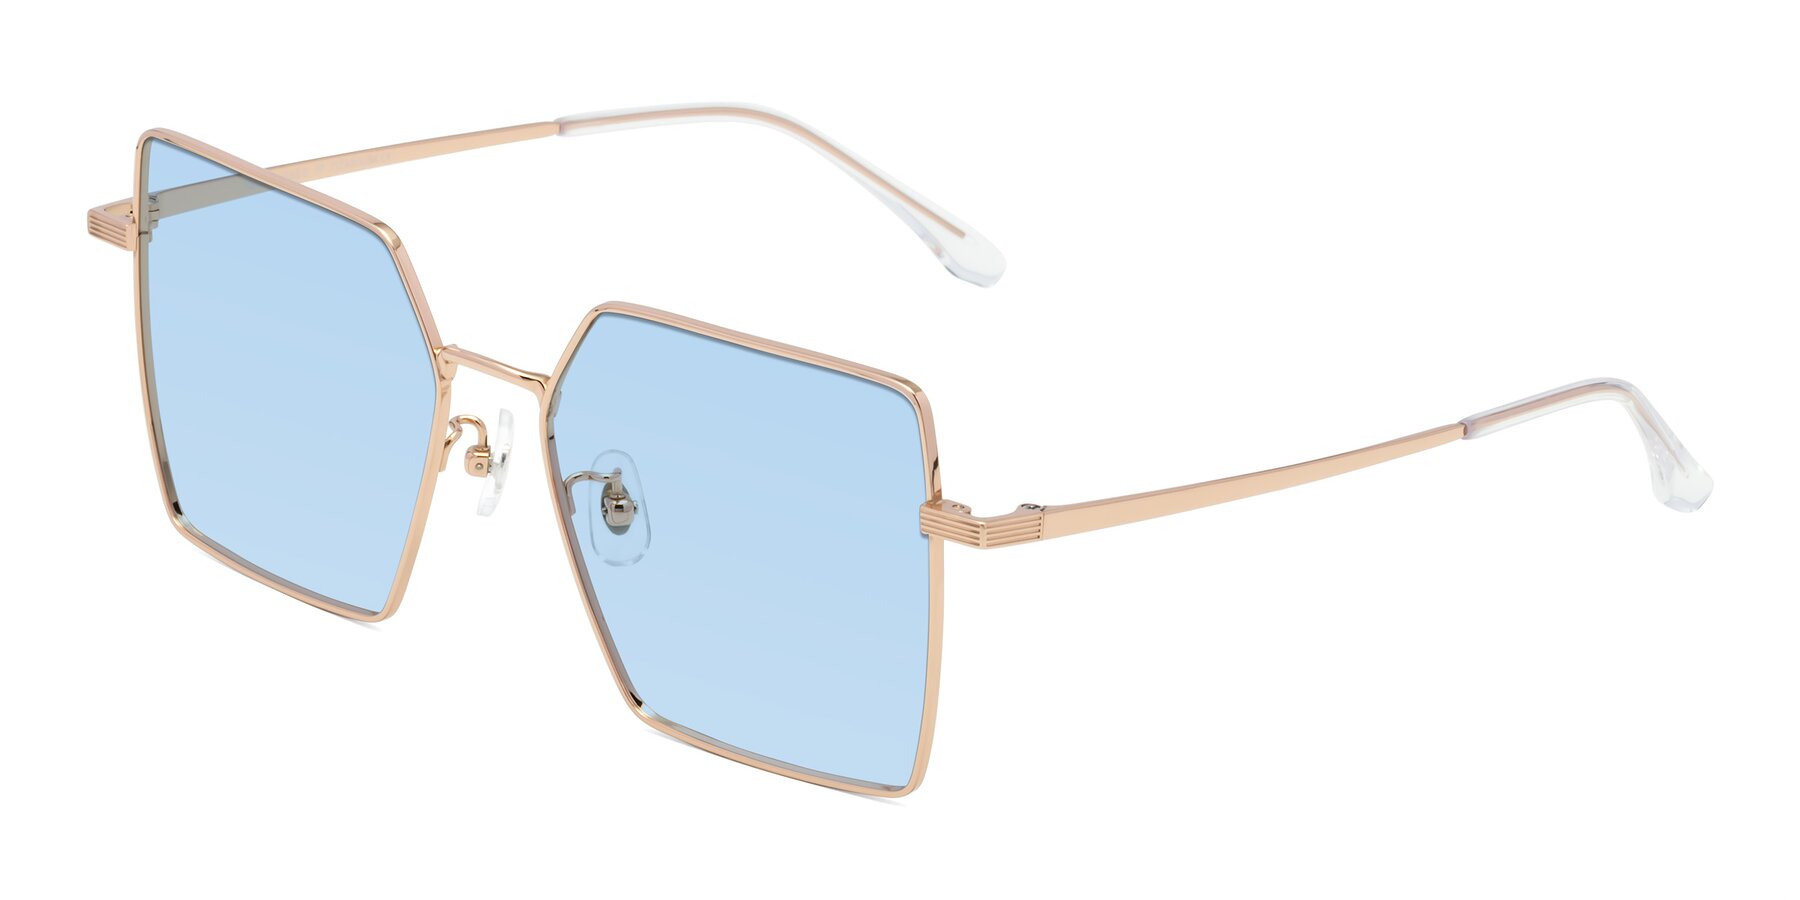 Angle of La Villa in Rose Gold with Light Blue Tinted Lenses